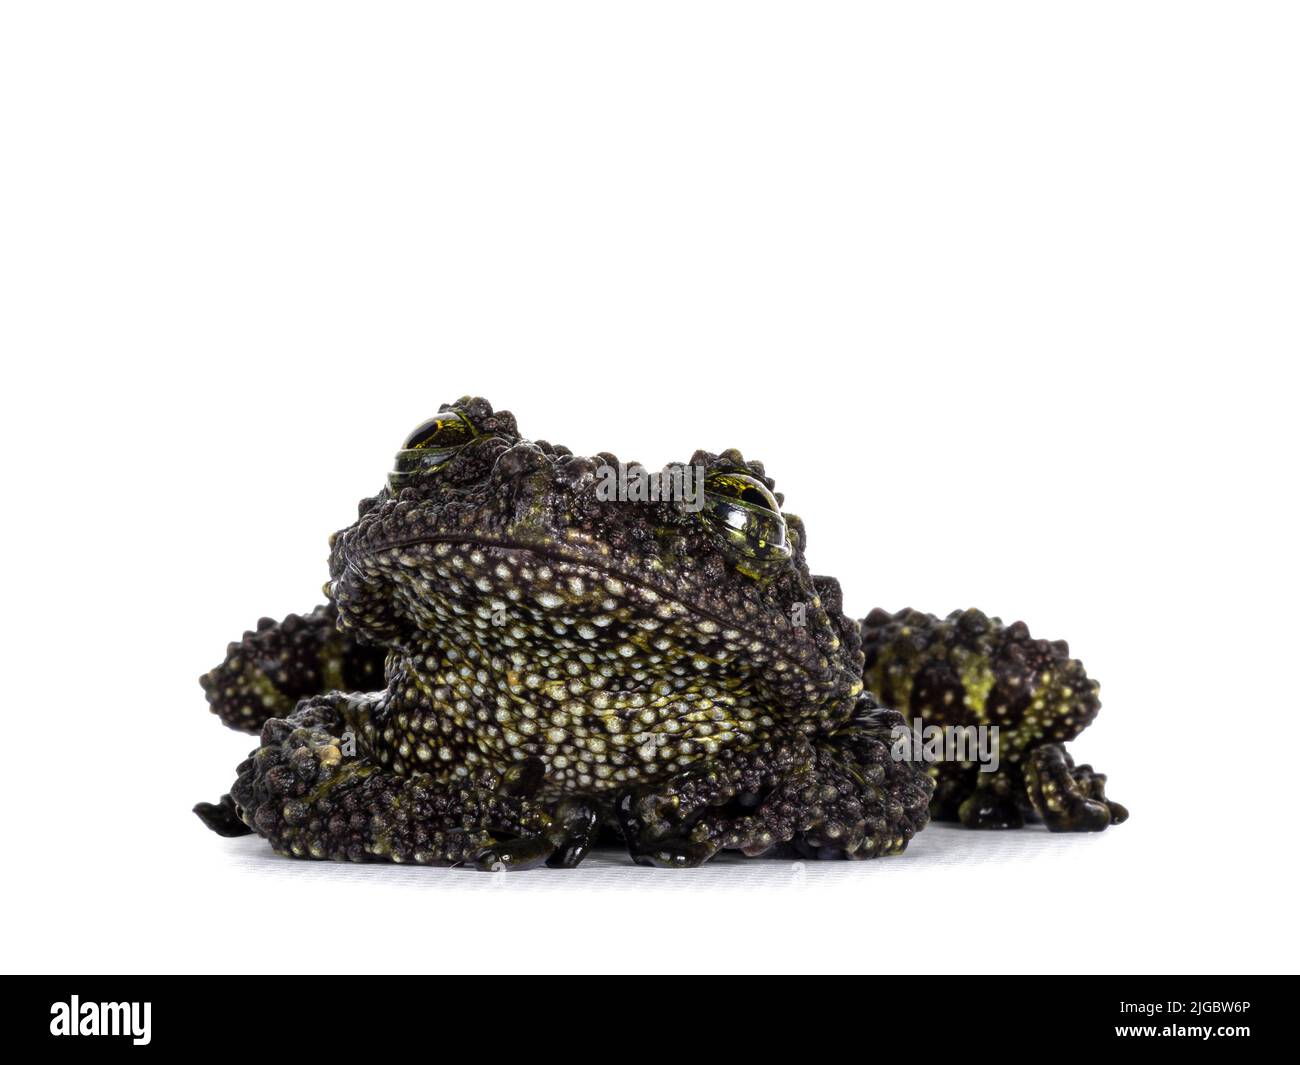 Mossy frog aka Theloderma corticale, sitting facing front. Isolated on a white background. Stock Photo